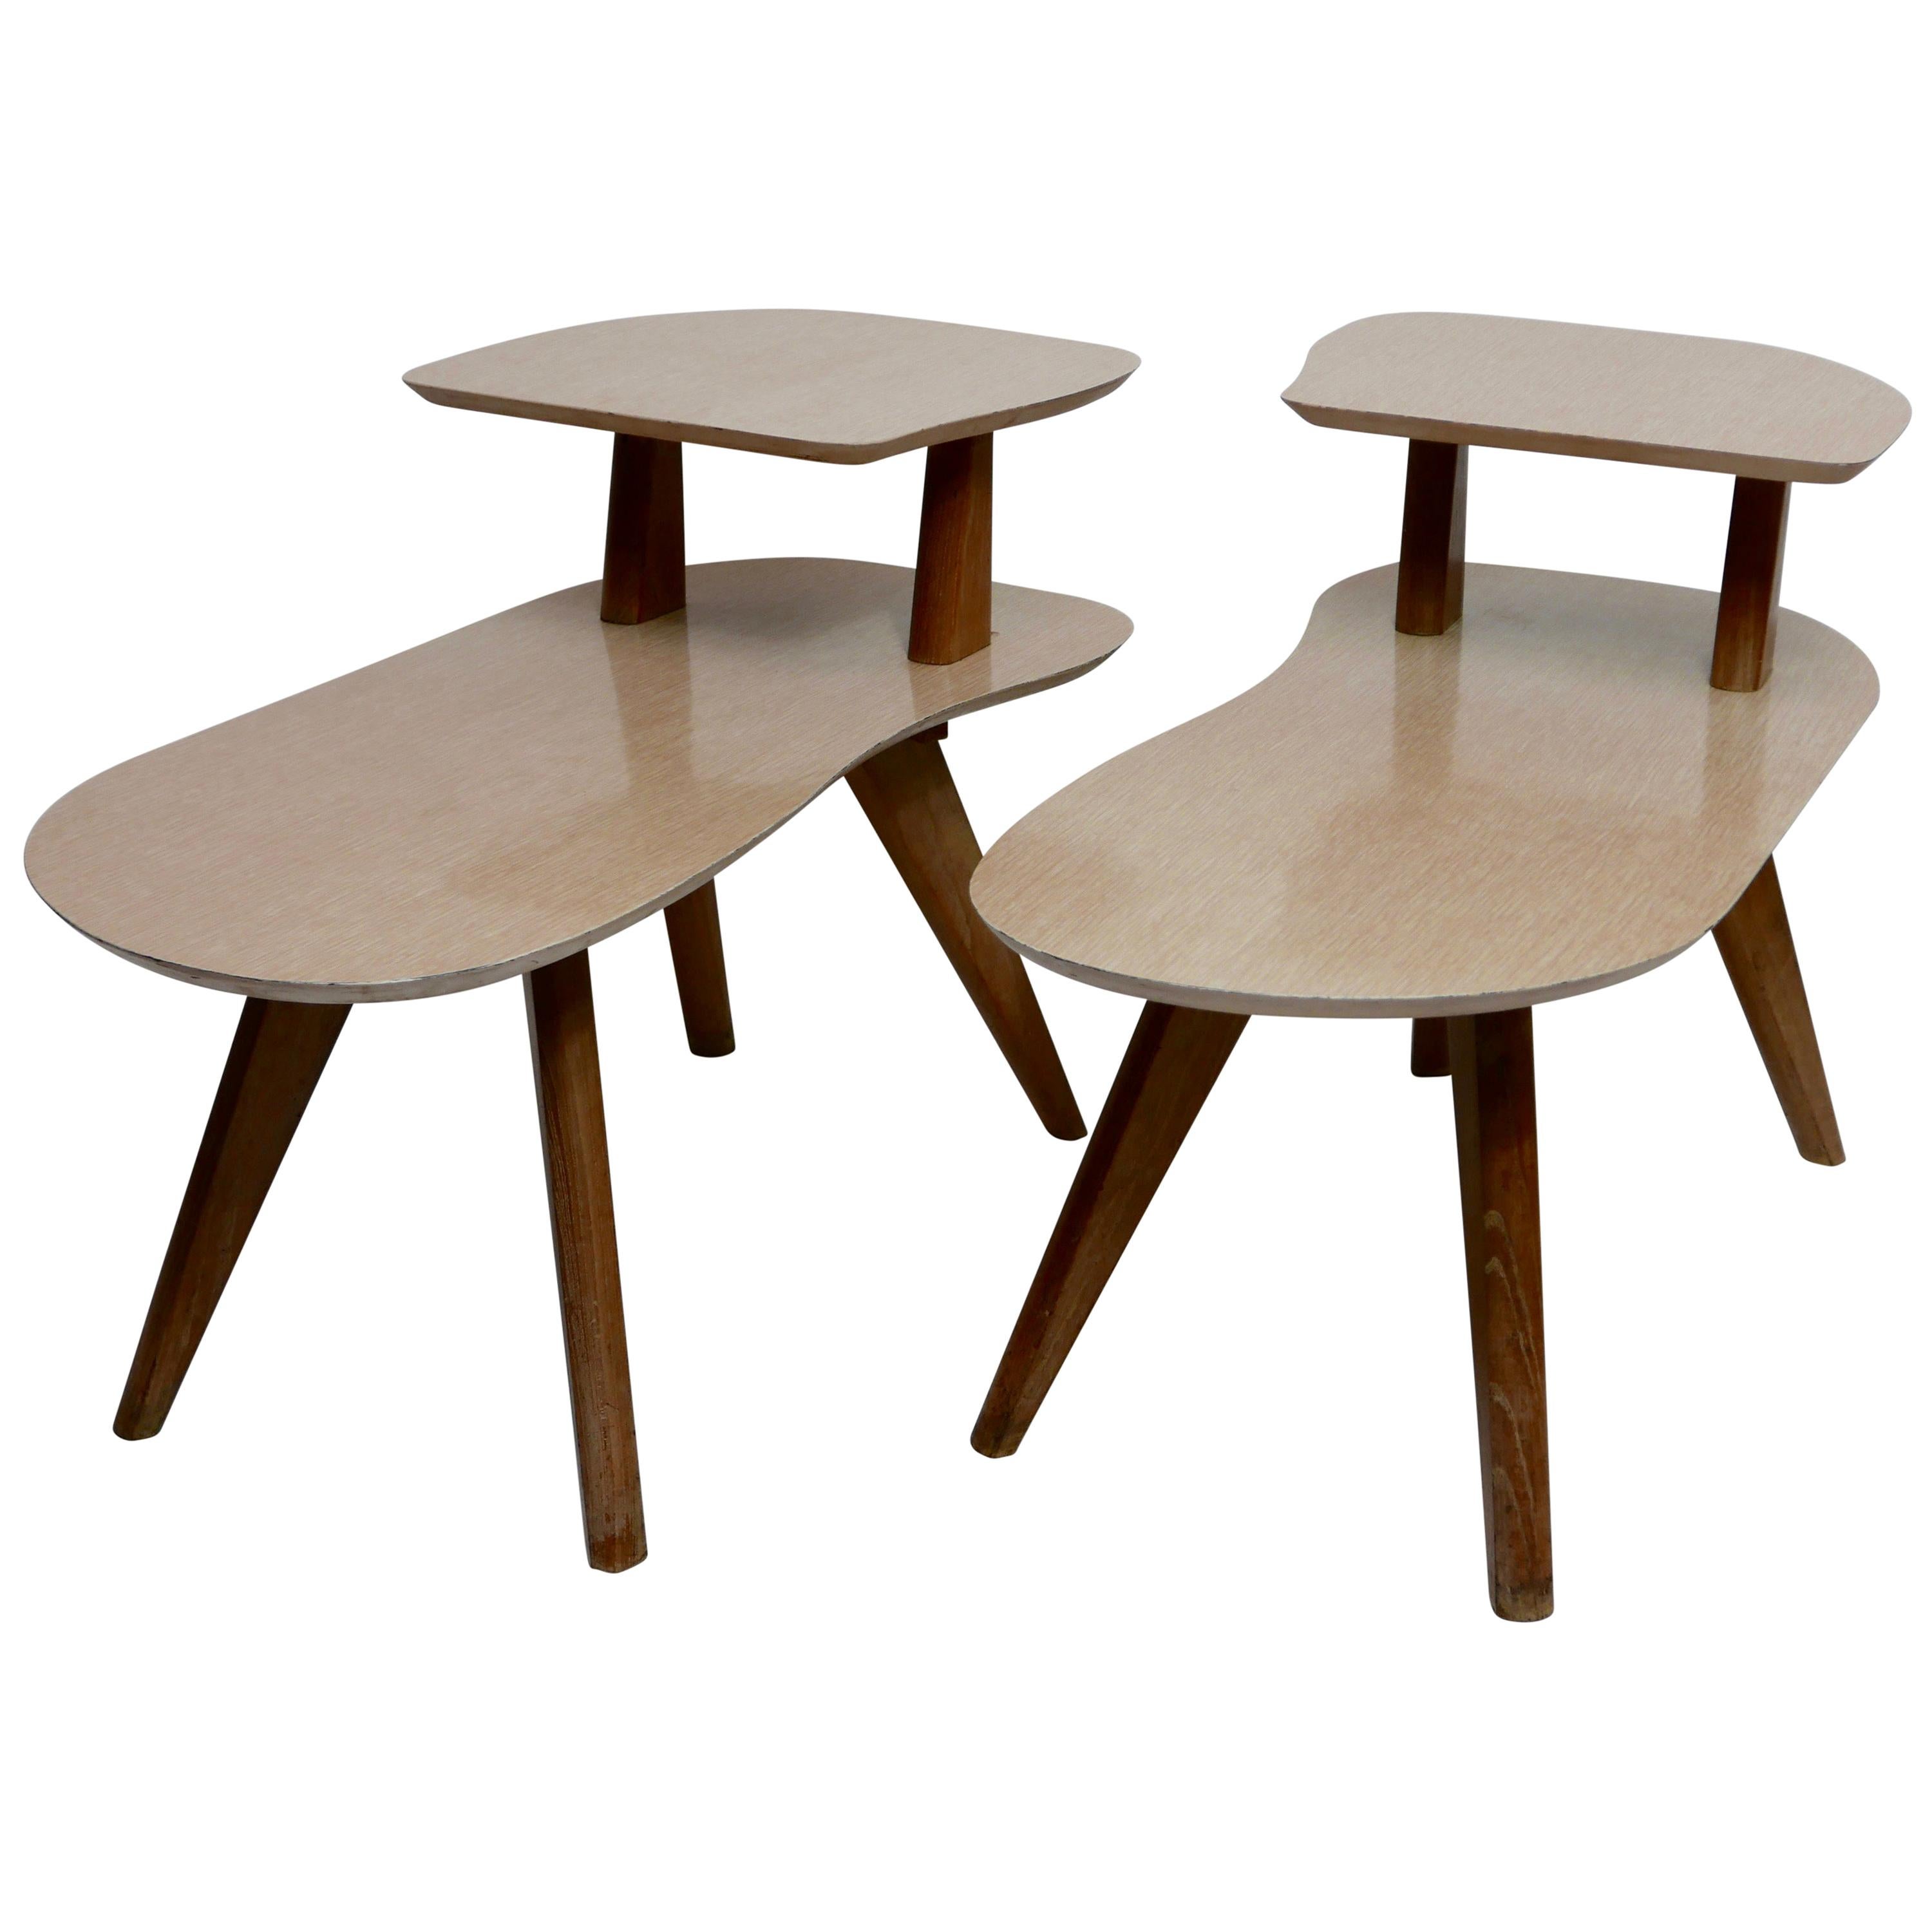 Pair of Shapely Mid-Century Modern Side Tables